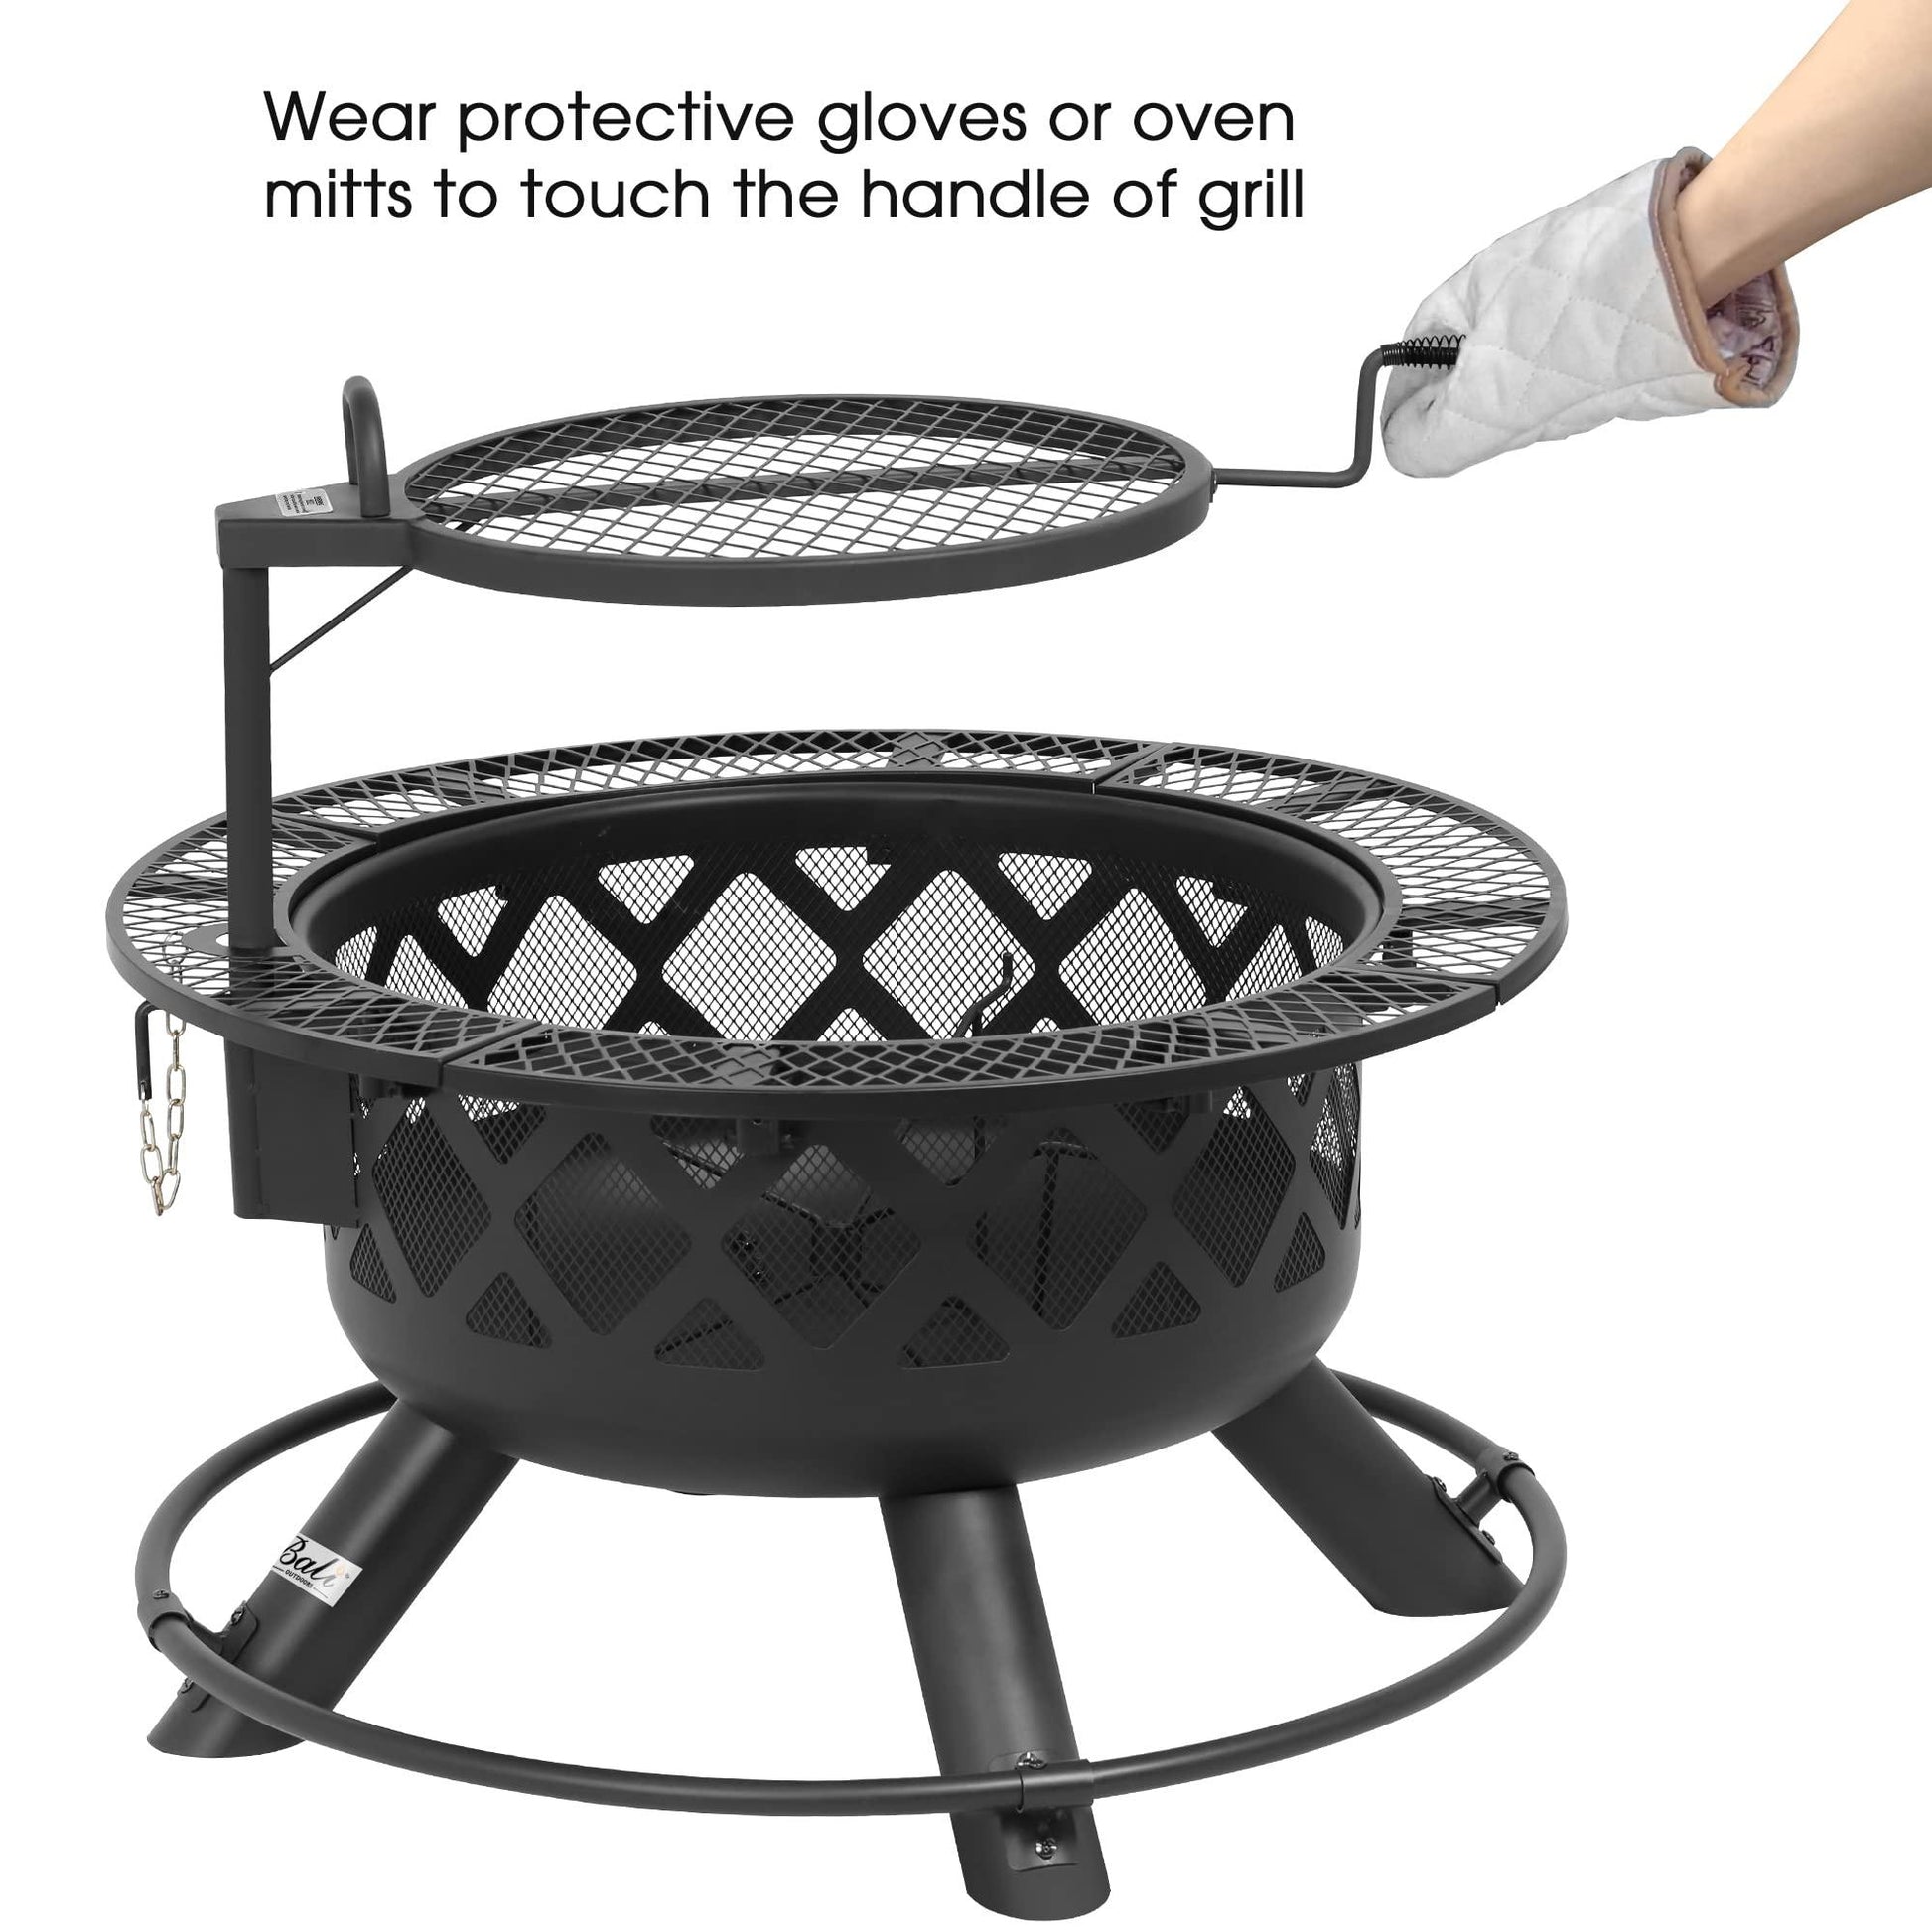 BALI OUTDOORS Wood Burning Fire Pit with Quick Removable Cooking Grill, Black, 32in - CookCave